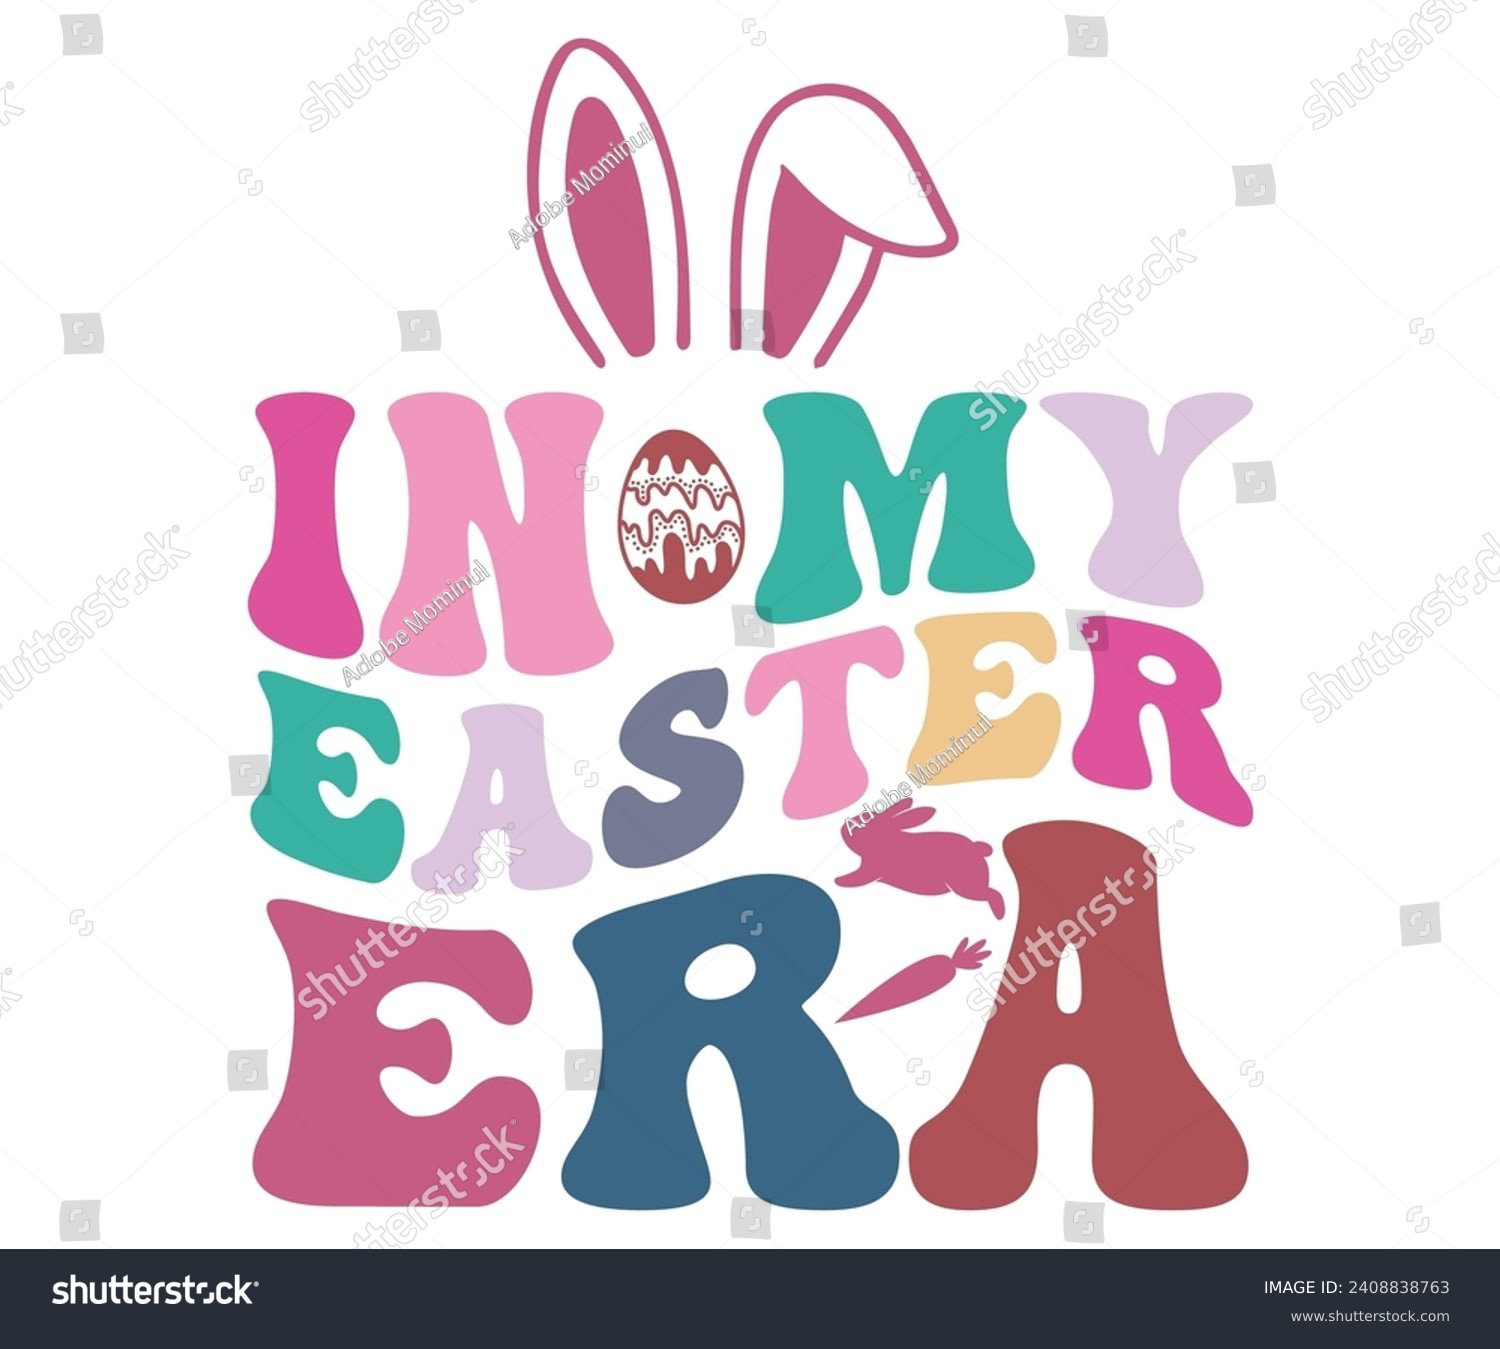 SVG of In My Easter Era Retro Svg,Happy Easter Svg,Png,Bunny Svg,Retro Easter Svg,Easter Quotes,Spring Svg,Easter Shirt Svg,Easter Gift Svg,Funny Easter Svg,Bunny Day, Egg for Kids,Cut Files,Cricut, svg